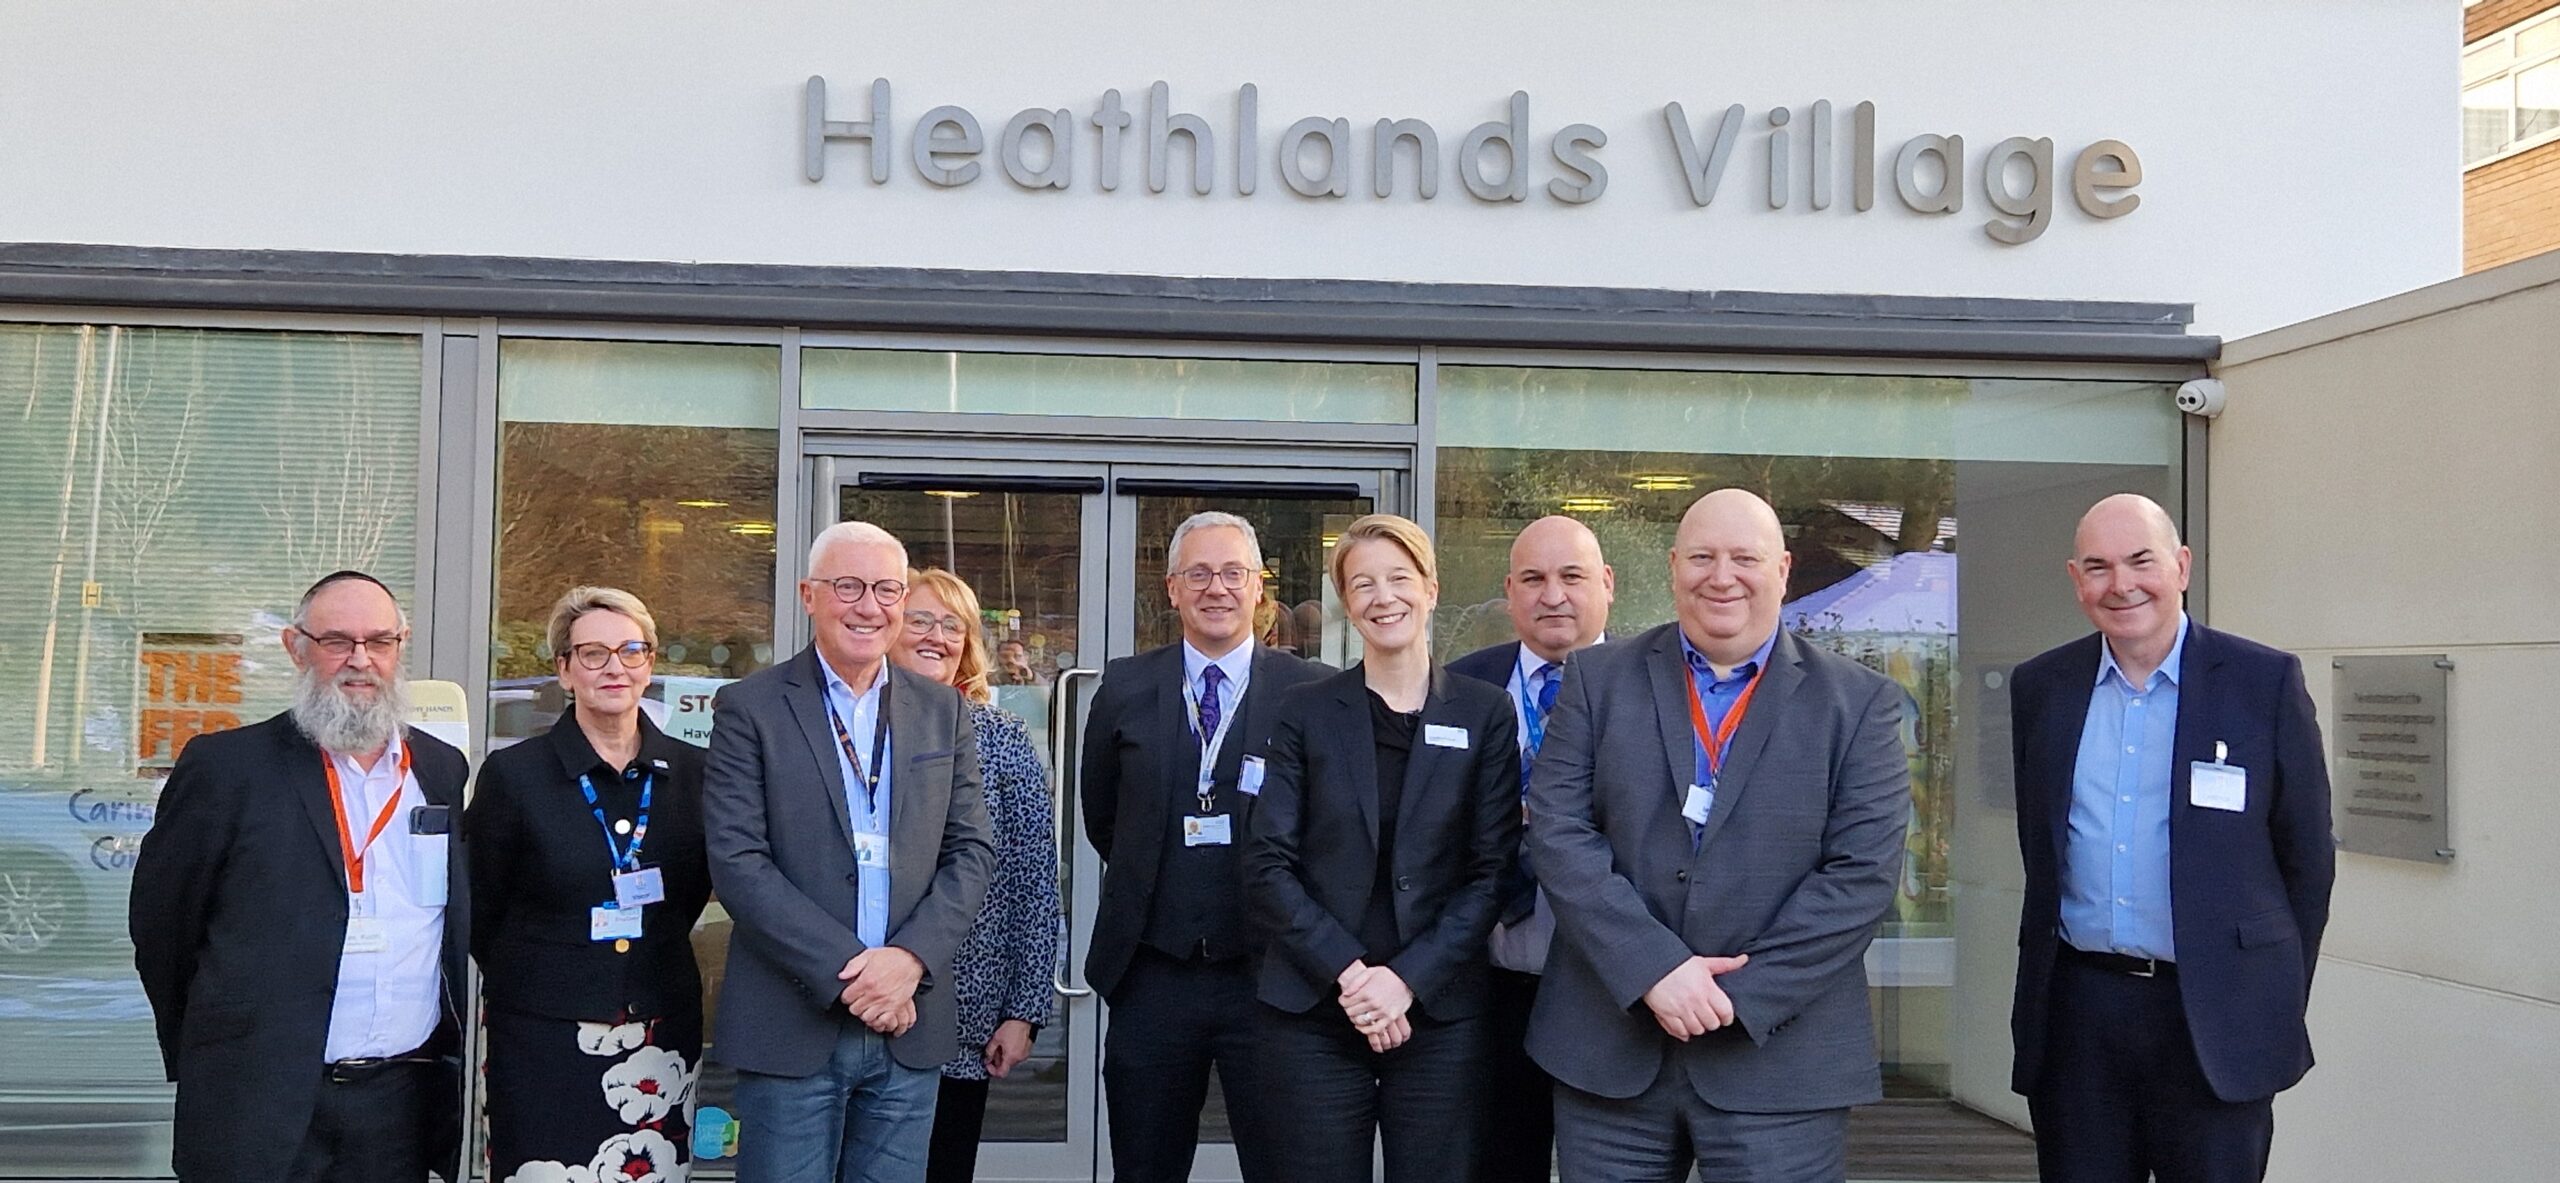 A group of NHS representatives standing outside Heathlands Village assisted living facility